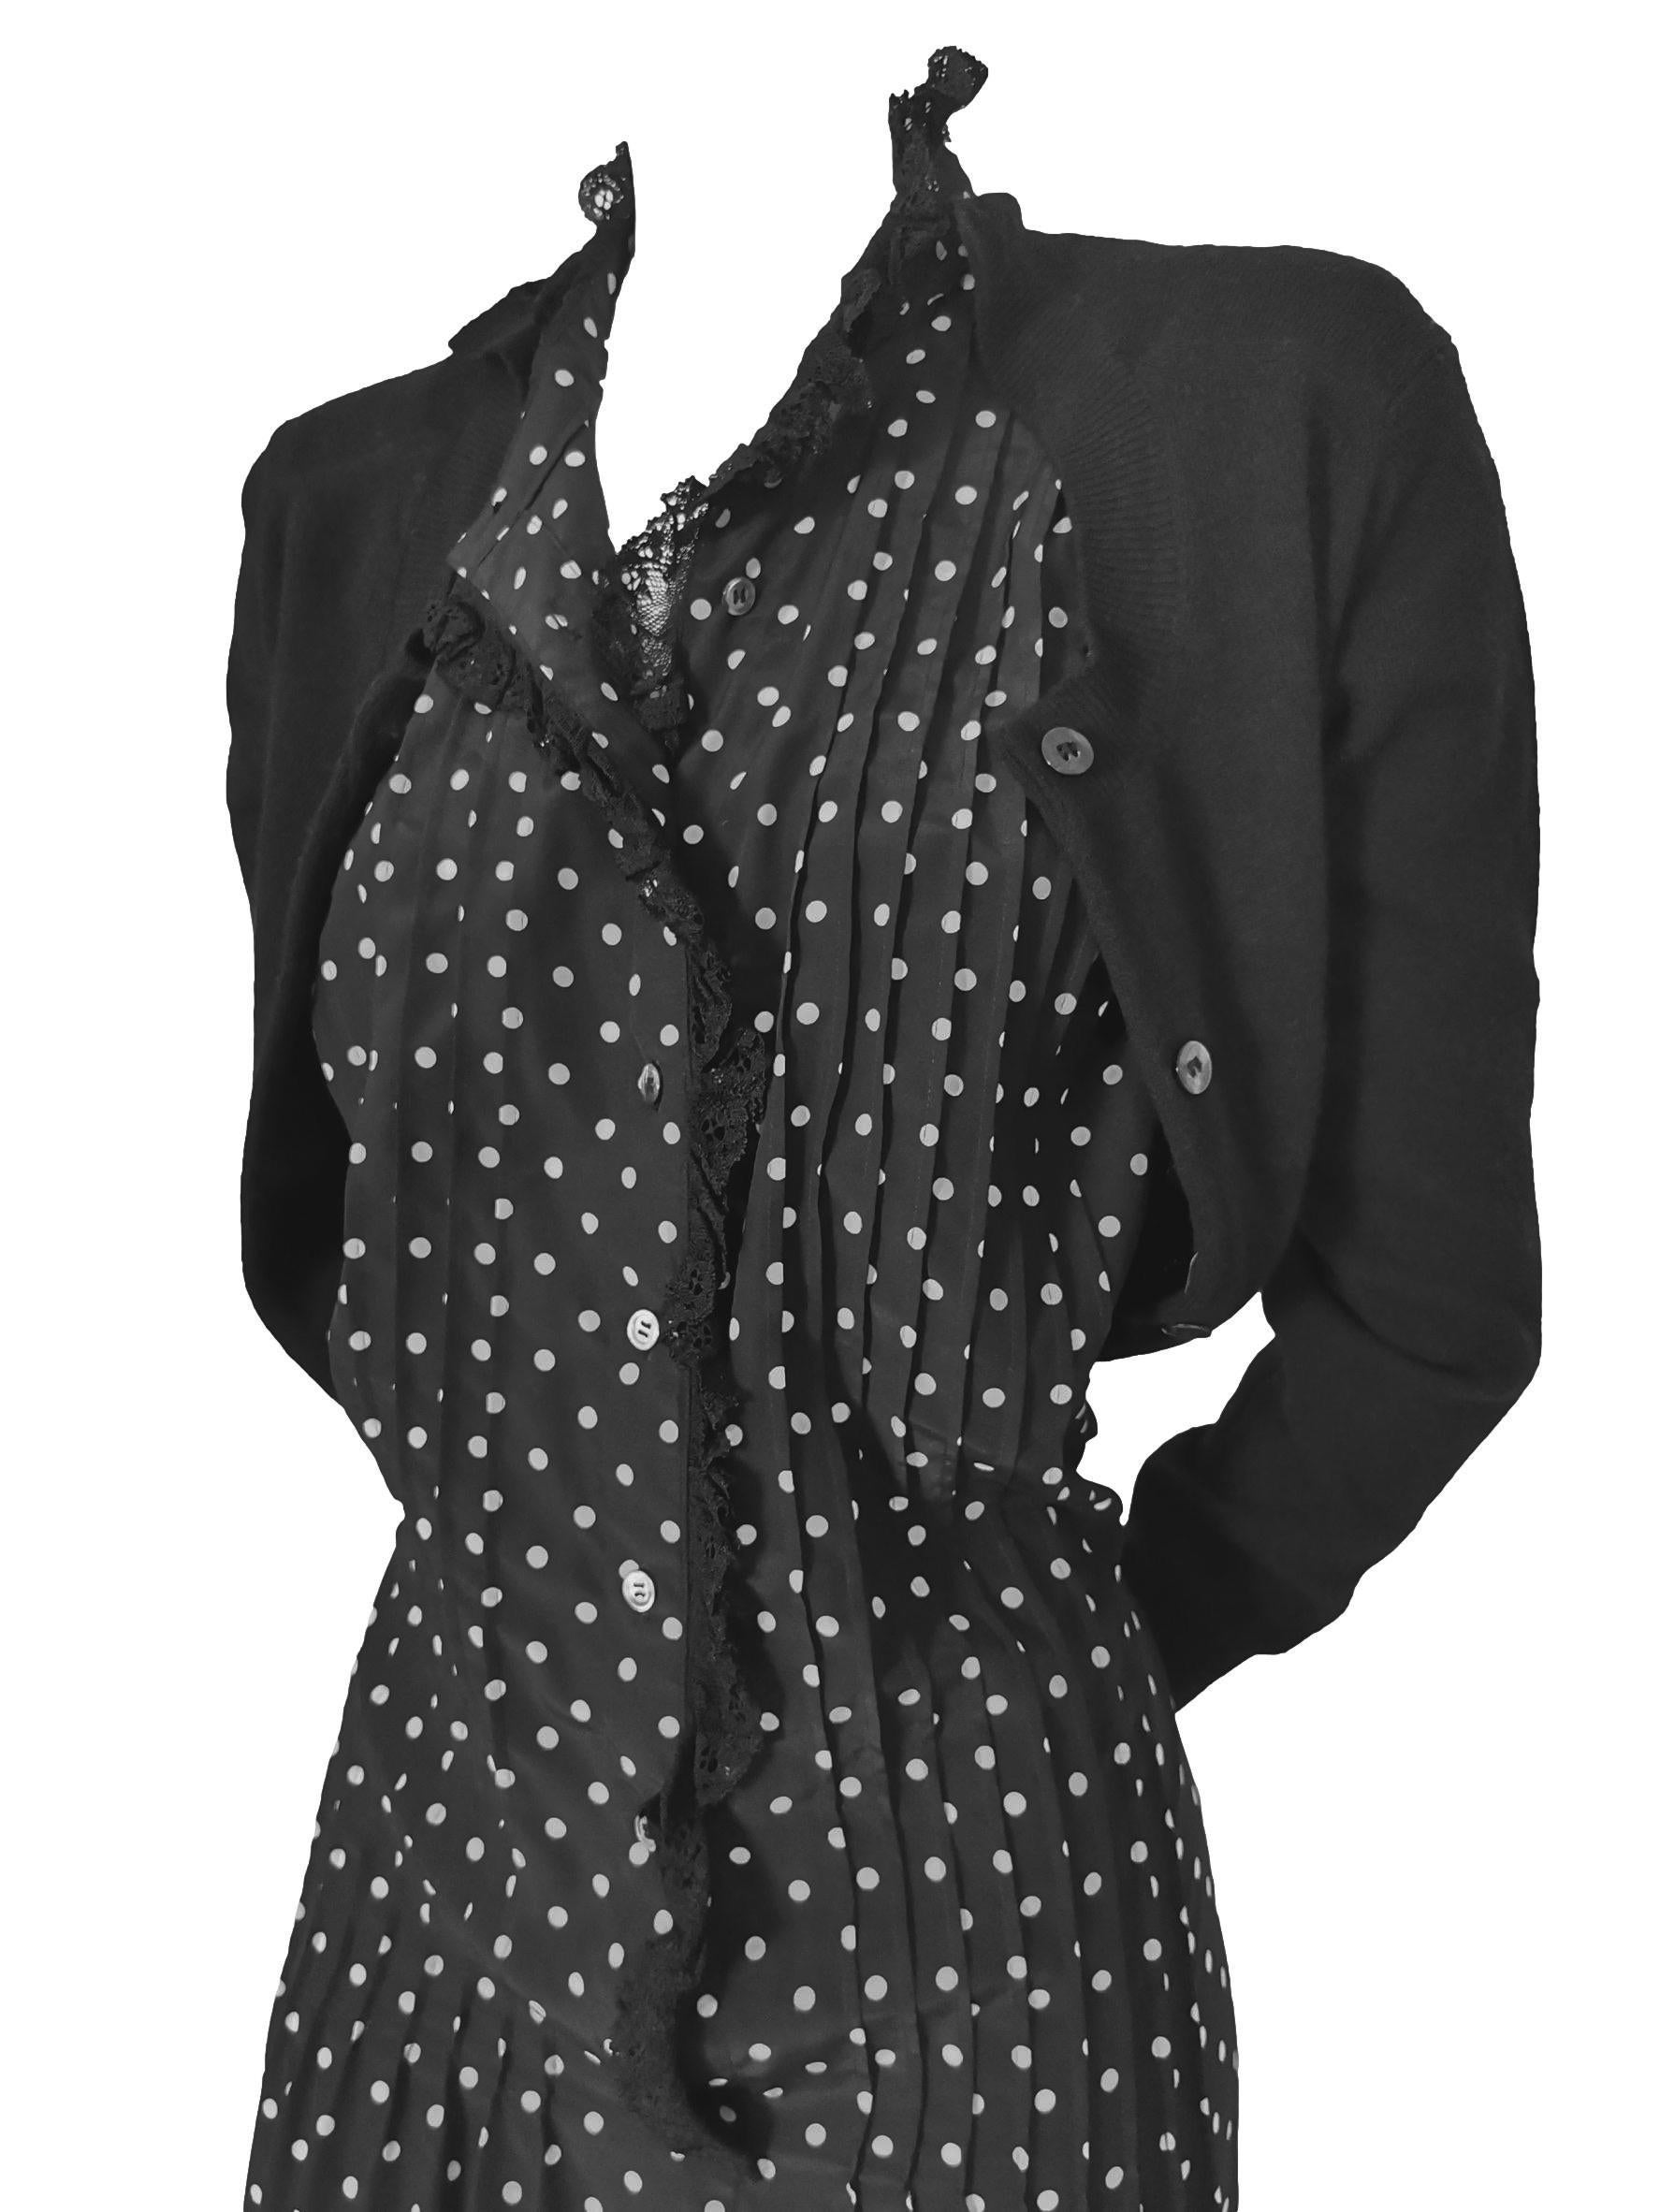 Junya Watanabe Comme des Garcons Twisted Polka Dot Cardigan Dress AD 2007 For Sale 9